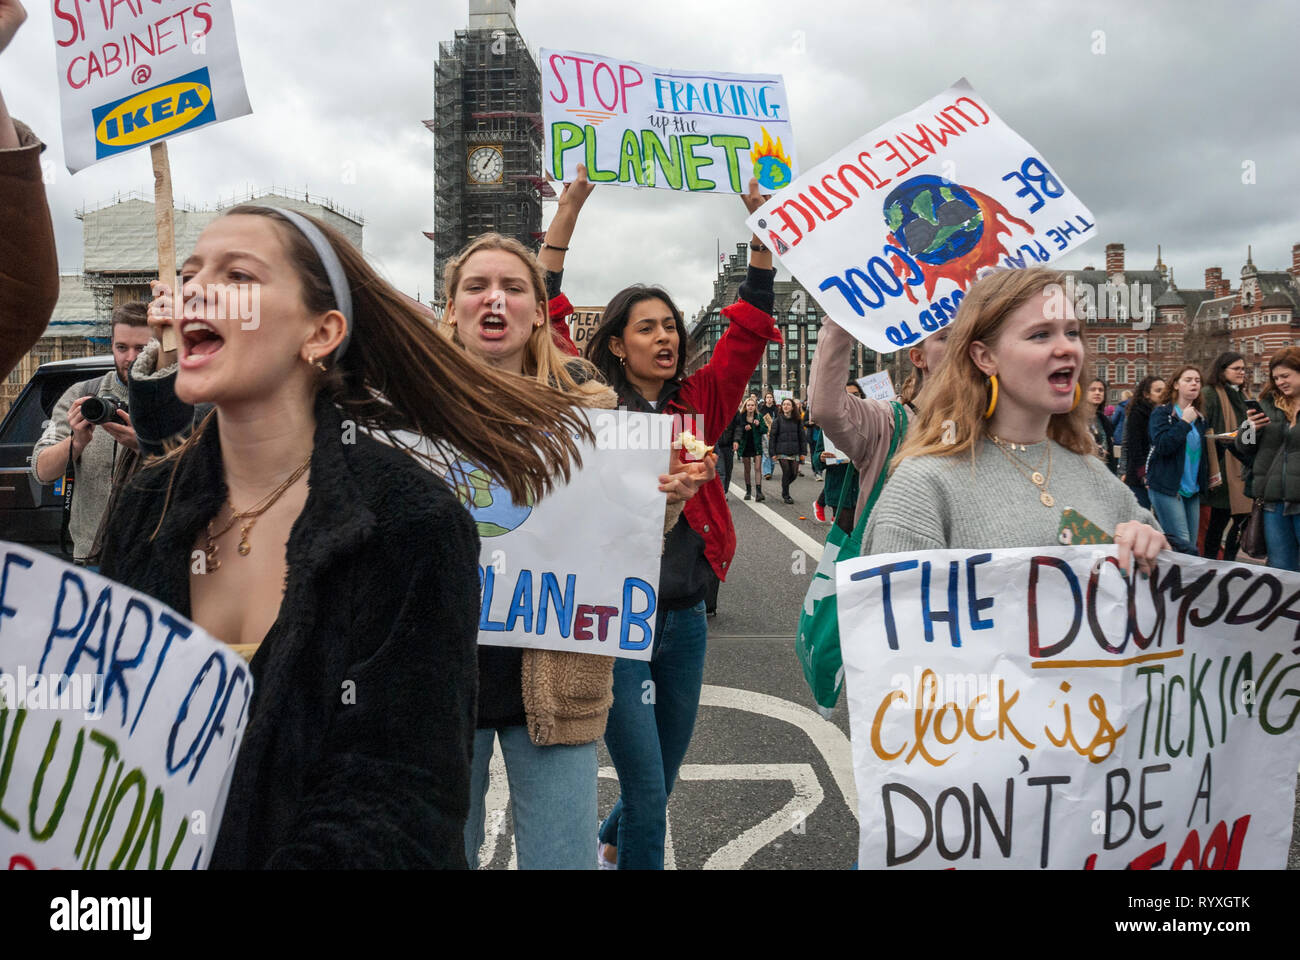 London, UK. 15th March, 2019. School students campaigning against climate change protest outside Parliament. Credit: Maggie sully/Alamy Live News. School children on strike to protest at climate change march over Westminster Bridge, London, with Big Ben in the background. In the foreground four lively young women sing and shout about global destruction with colourful banners 'Stop Fracking up the planet', 'Climate Justice', and 'The doomsday clock is ticking'.  Part of the worldwide 'FridaysforFuture' protest. Stock Photo